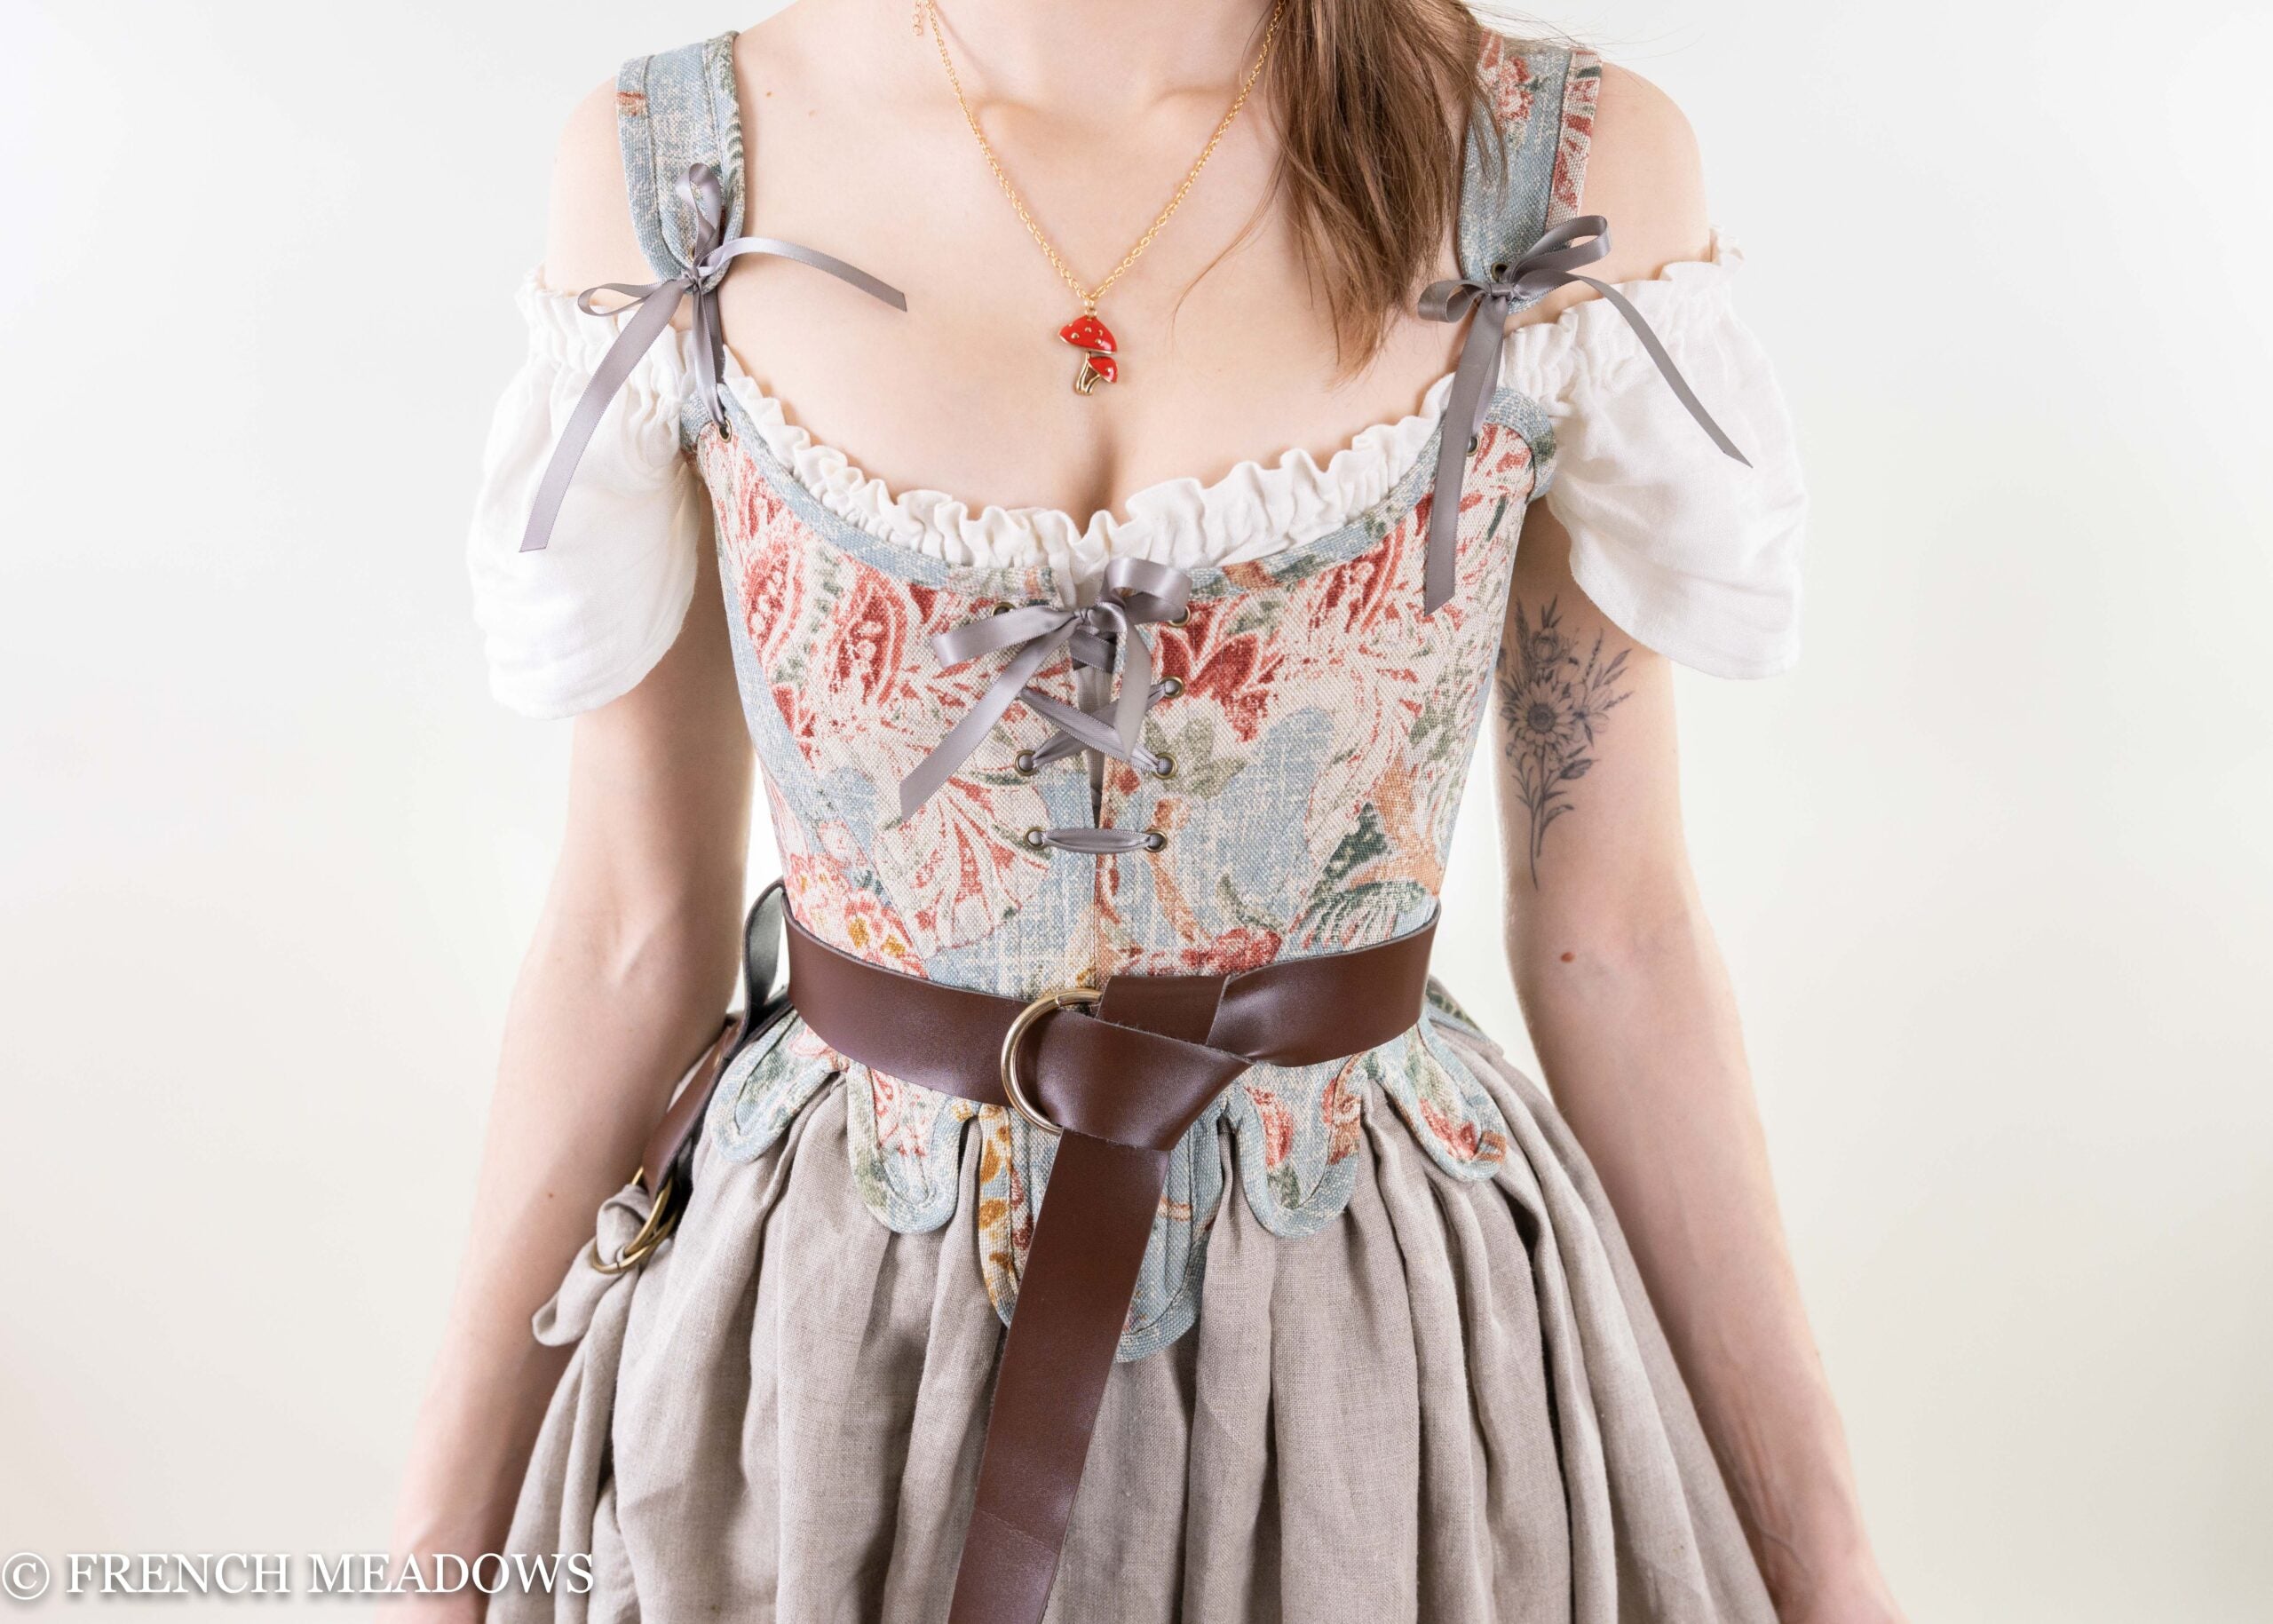 The History of the Corset Is a Controversial One